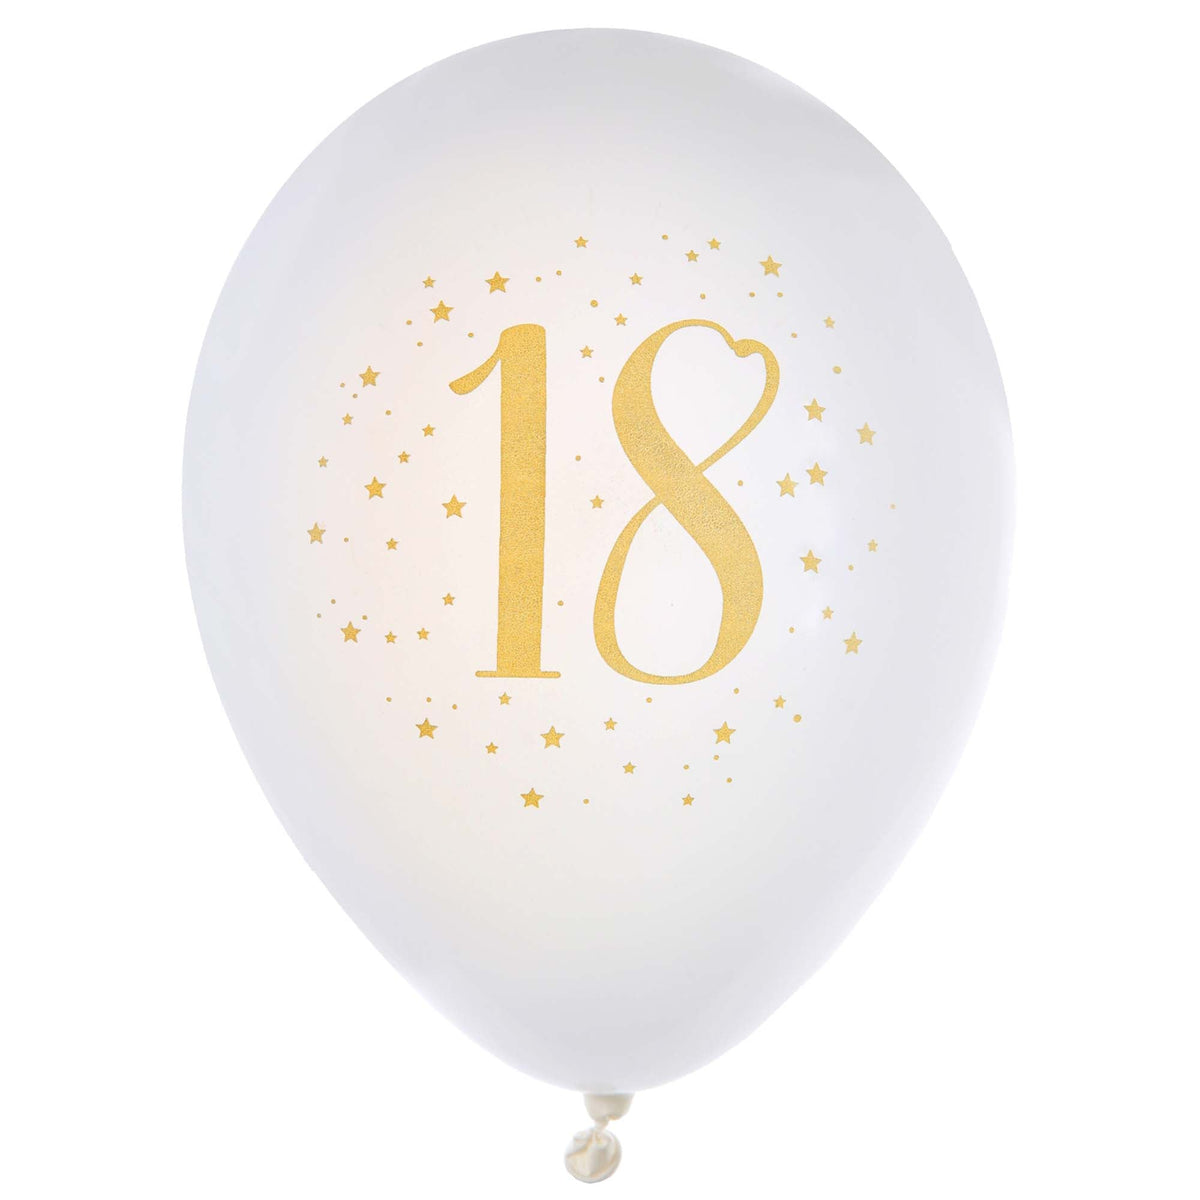 SANTEX Age Specific Birthday White and Gold 18th Birthday Latex Balloons, 12 Inches, 6 Count 3660380050933